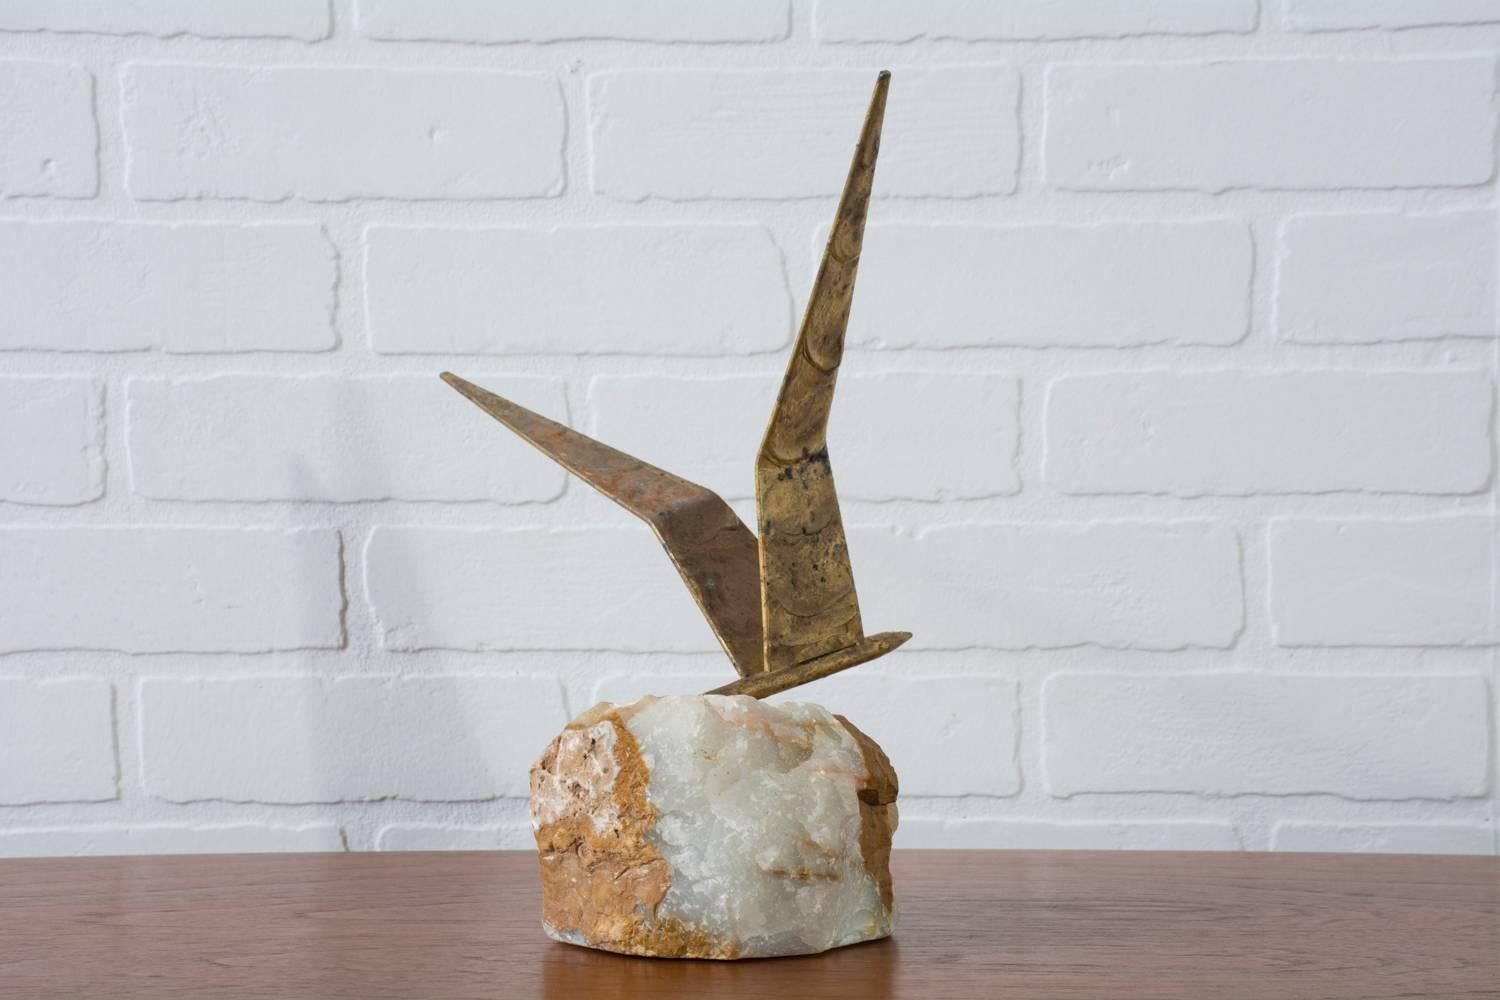 Carved Vintage Bird in Flight Sculpture on White Onyx Stone by Curtis Jere